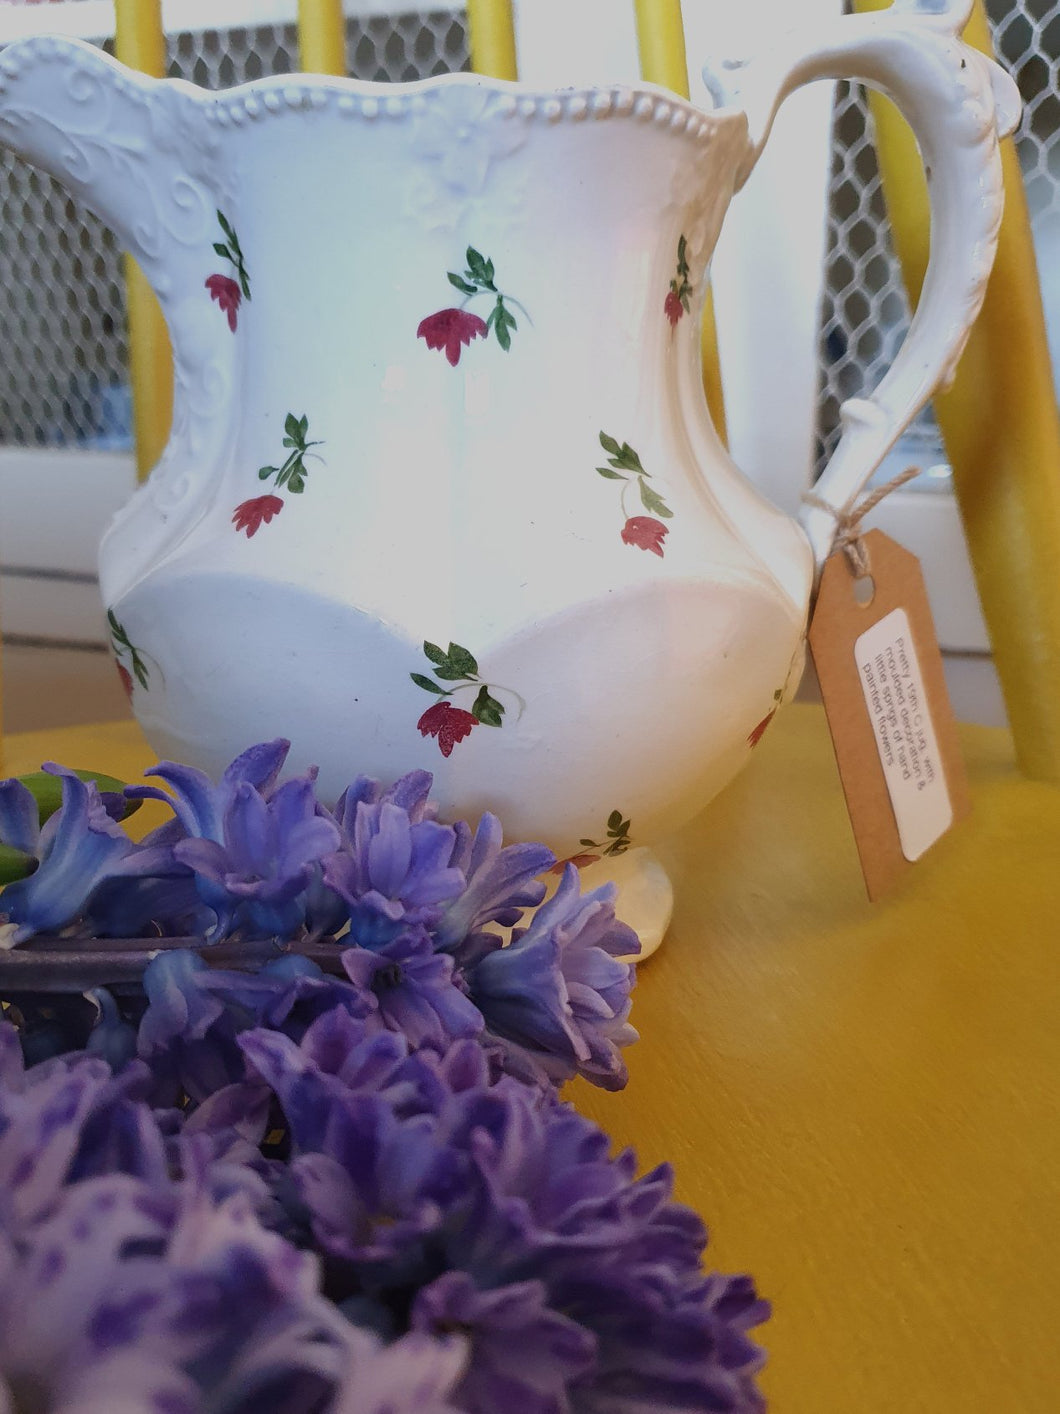 Pretty 19th century jug with moulded decoration and little sprigs of handpainted flowers